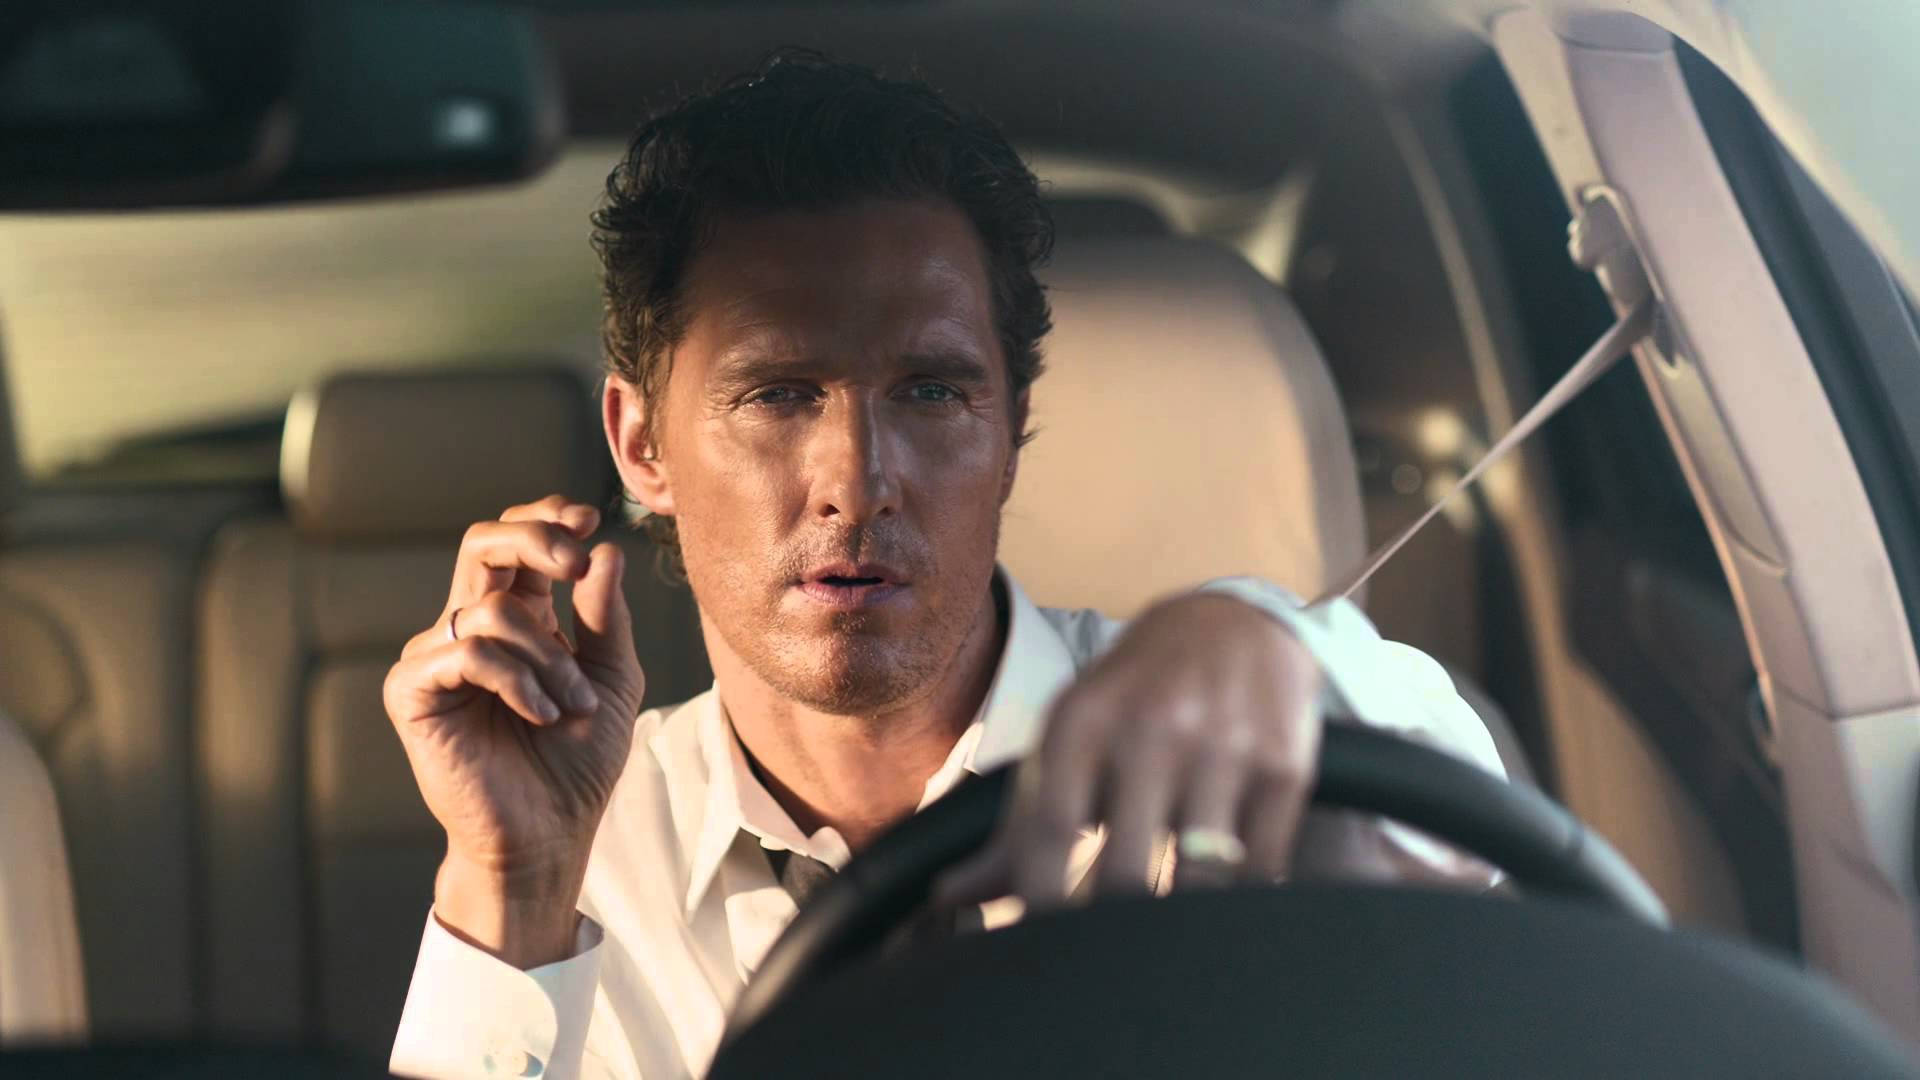 Matthew Mcconaughey In Driver's Seat Background